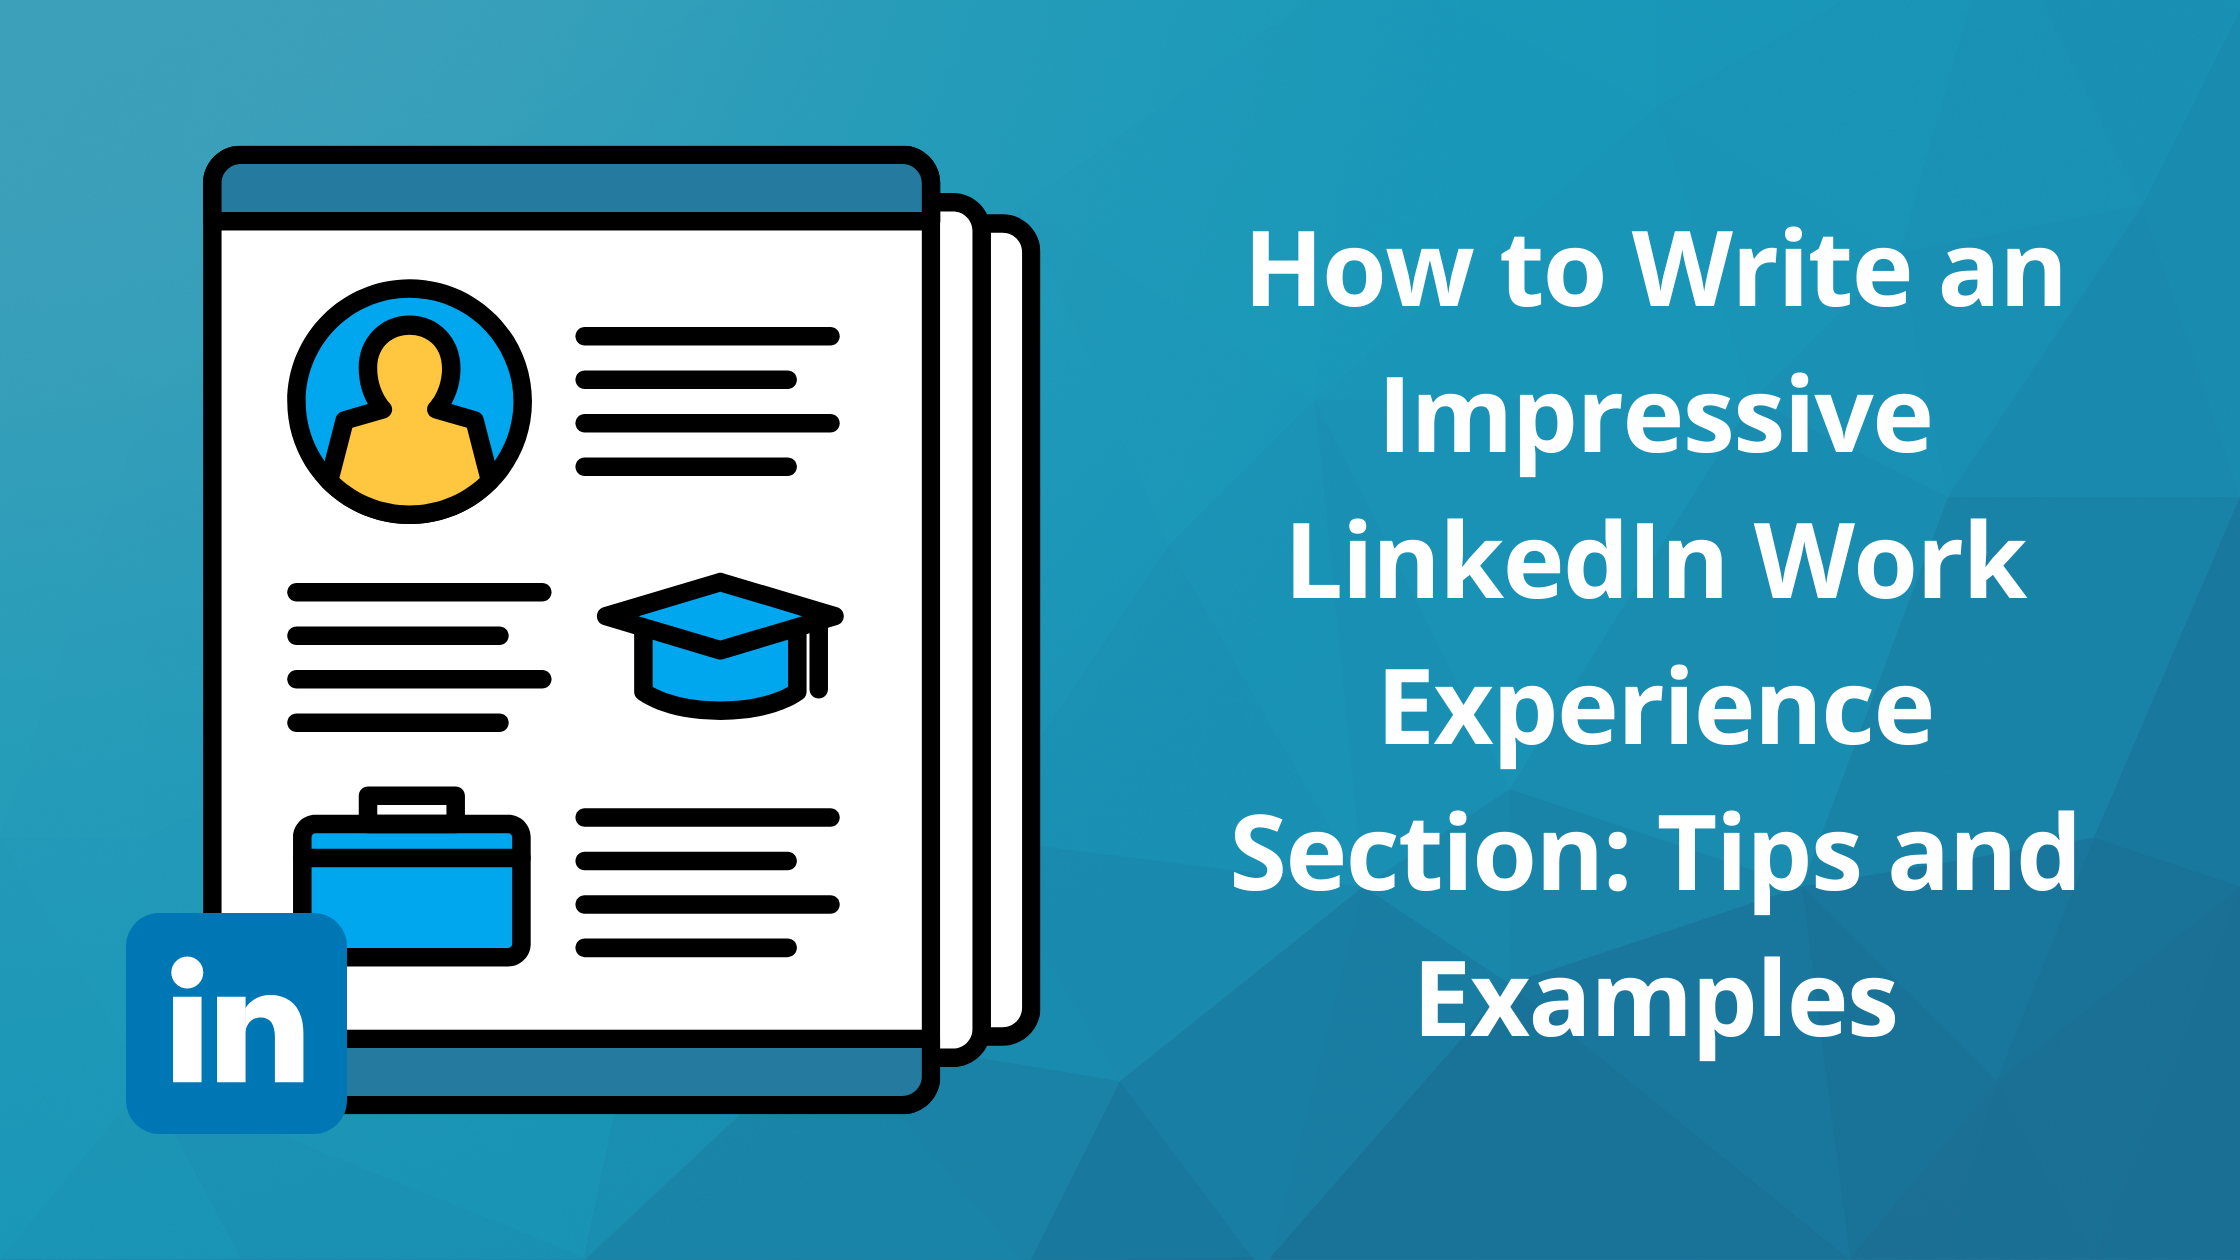 How to Write an Impressive LinkedIn Work Experience Section: Tips and Examples